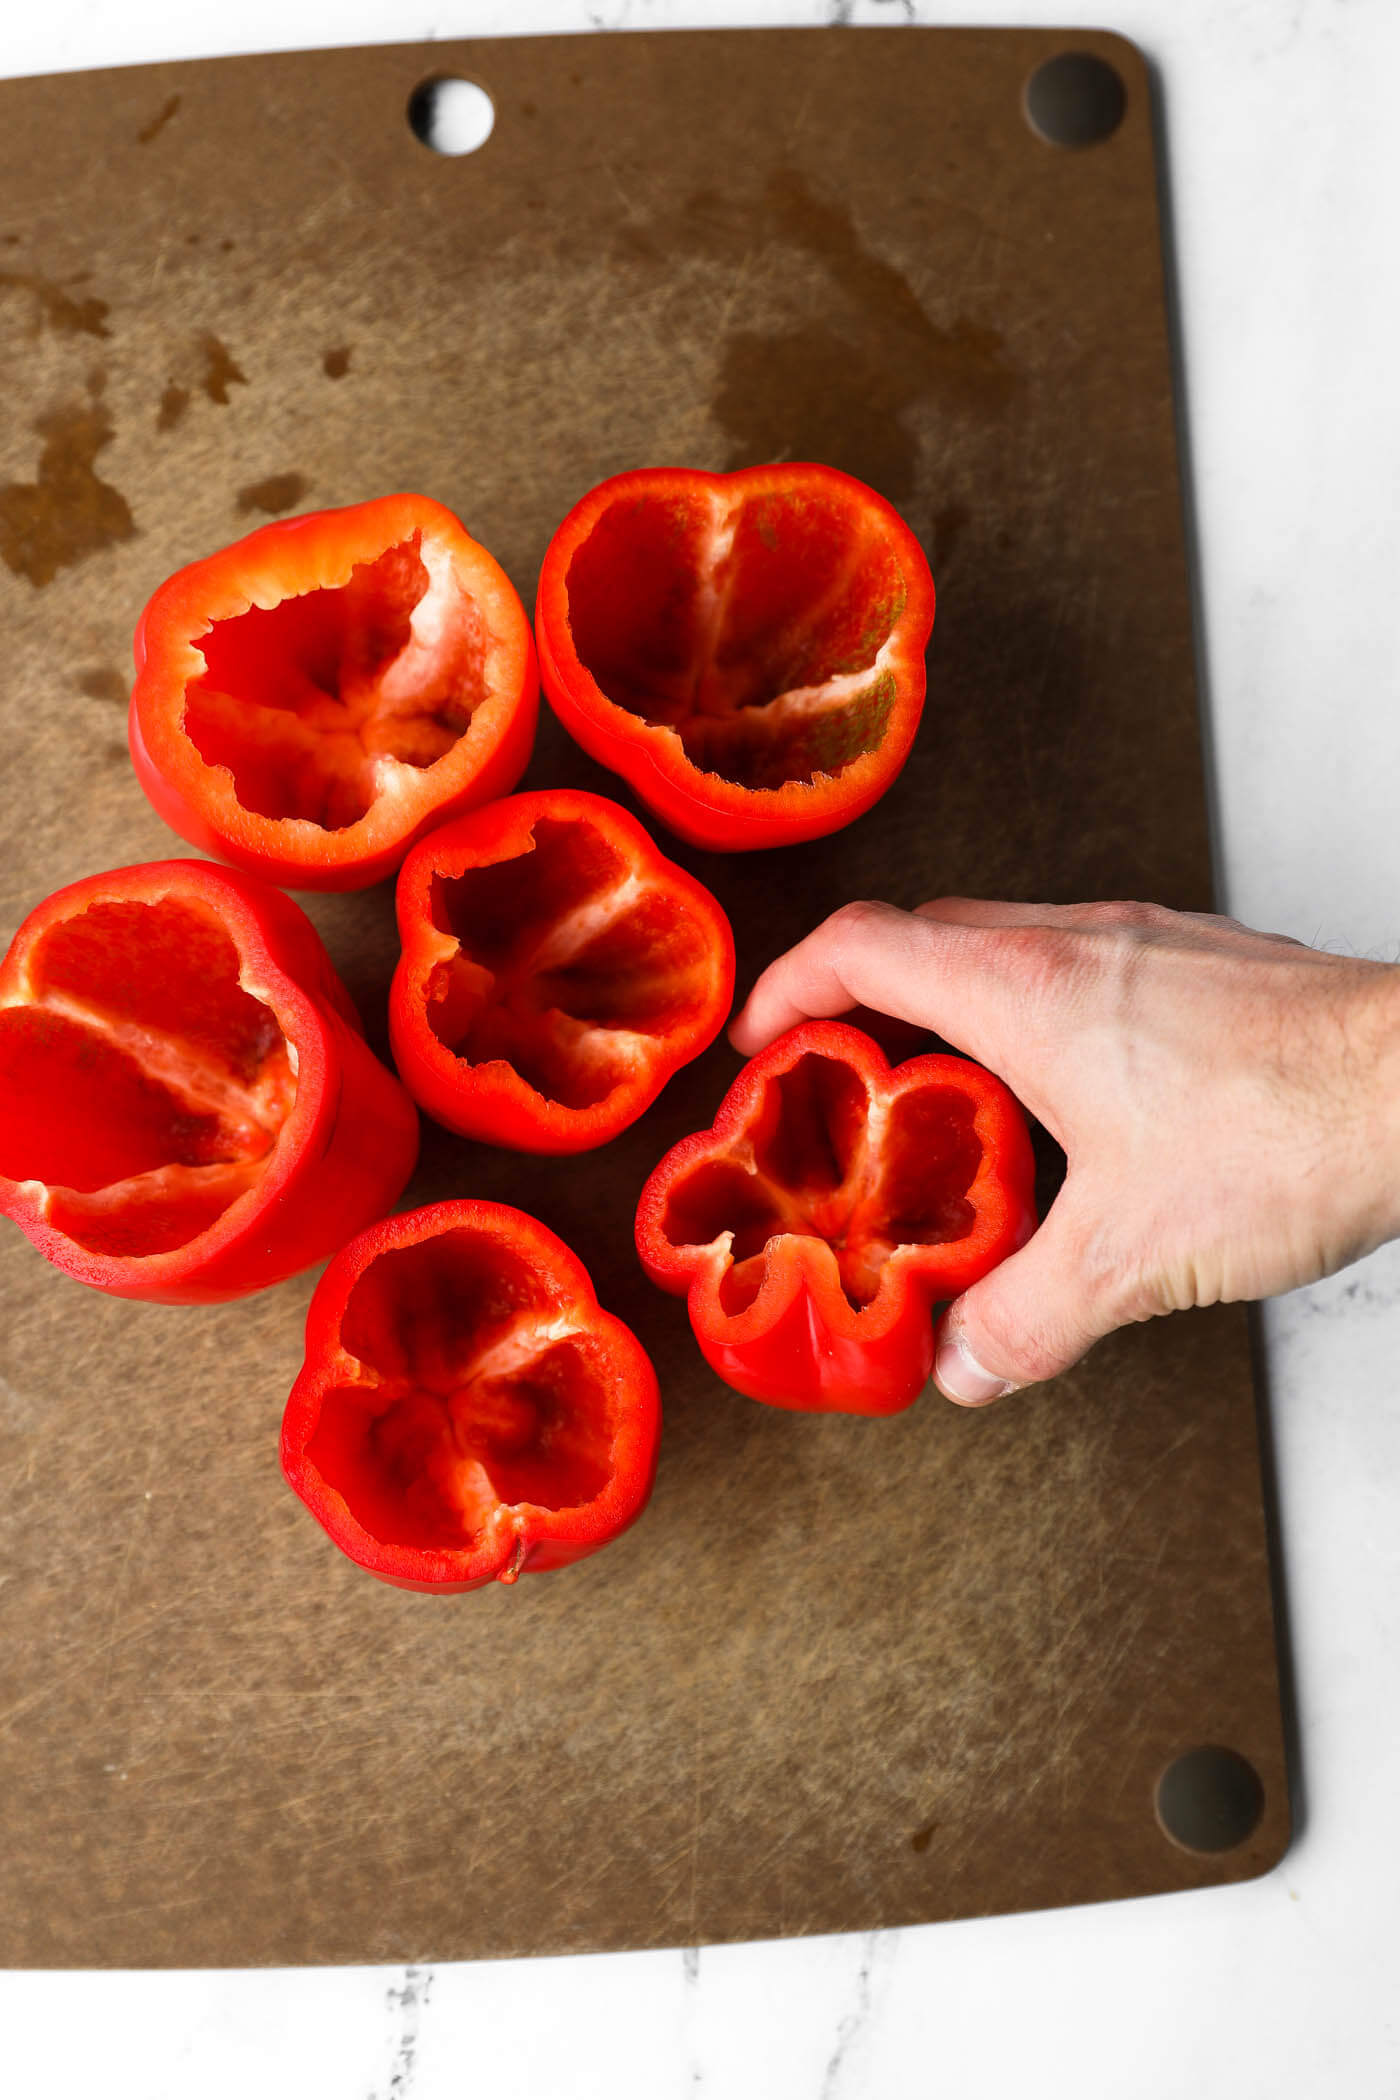 A hand placing a bell pepper on a cutting board. The bell pepper has the top sliced off and the seeds removed. There are 6 bell peppers on the cutting board.